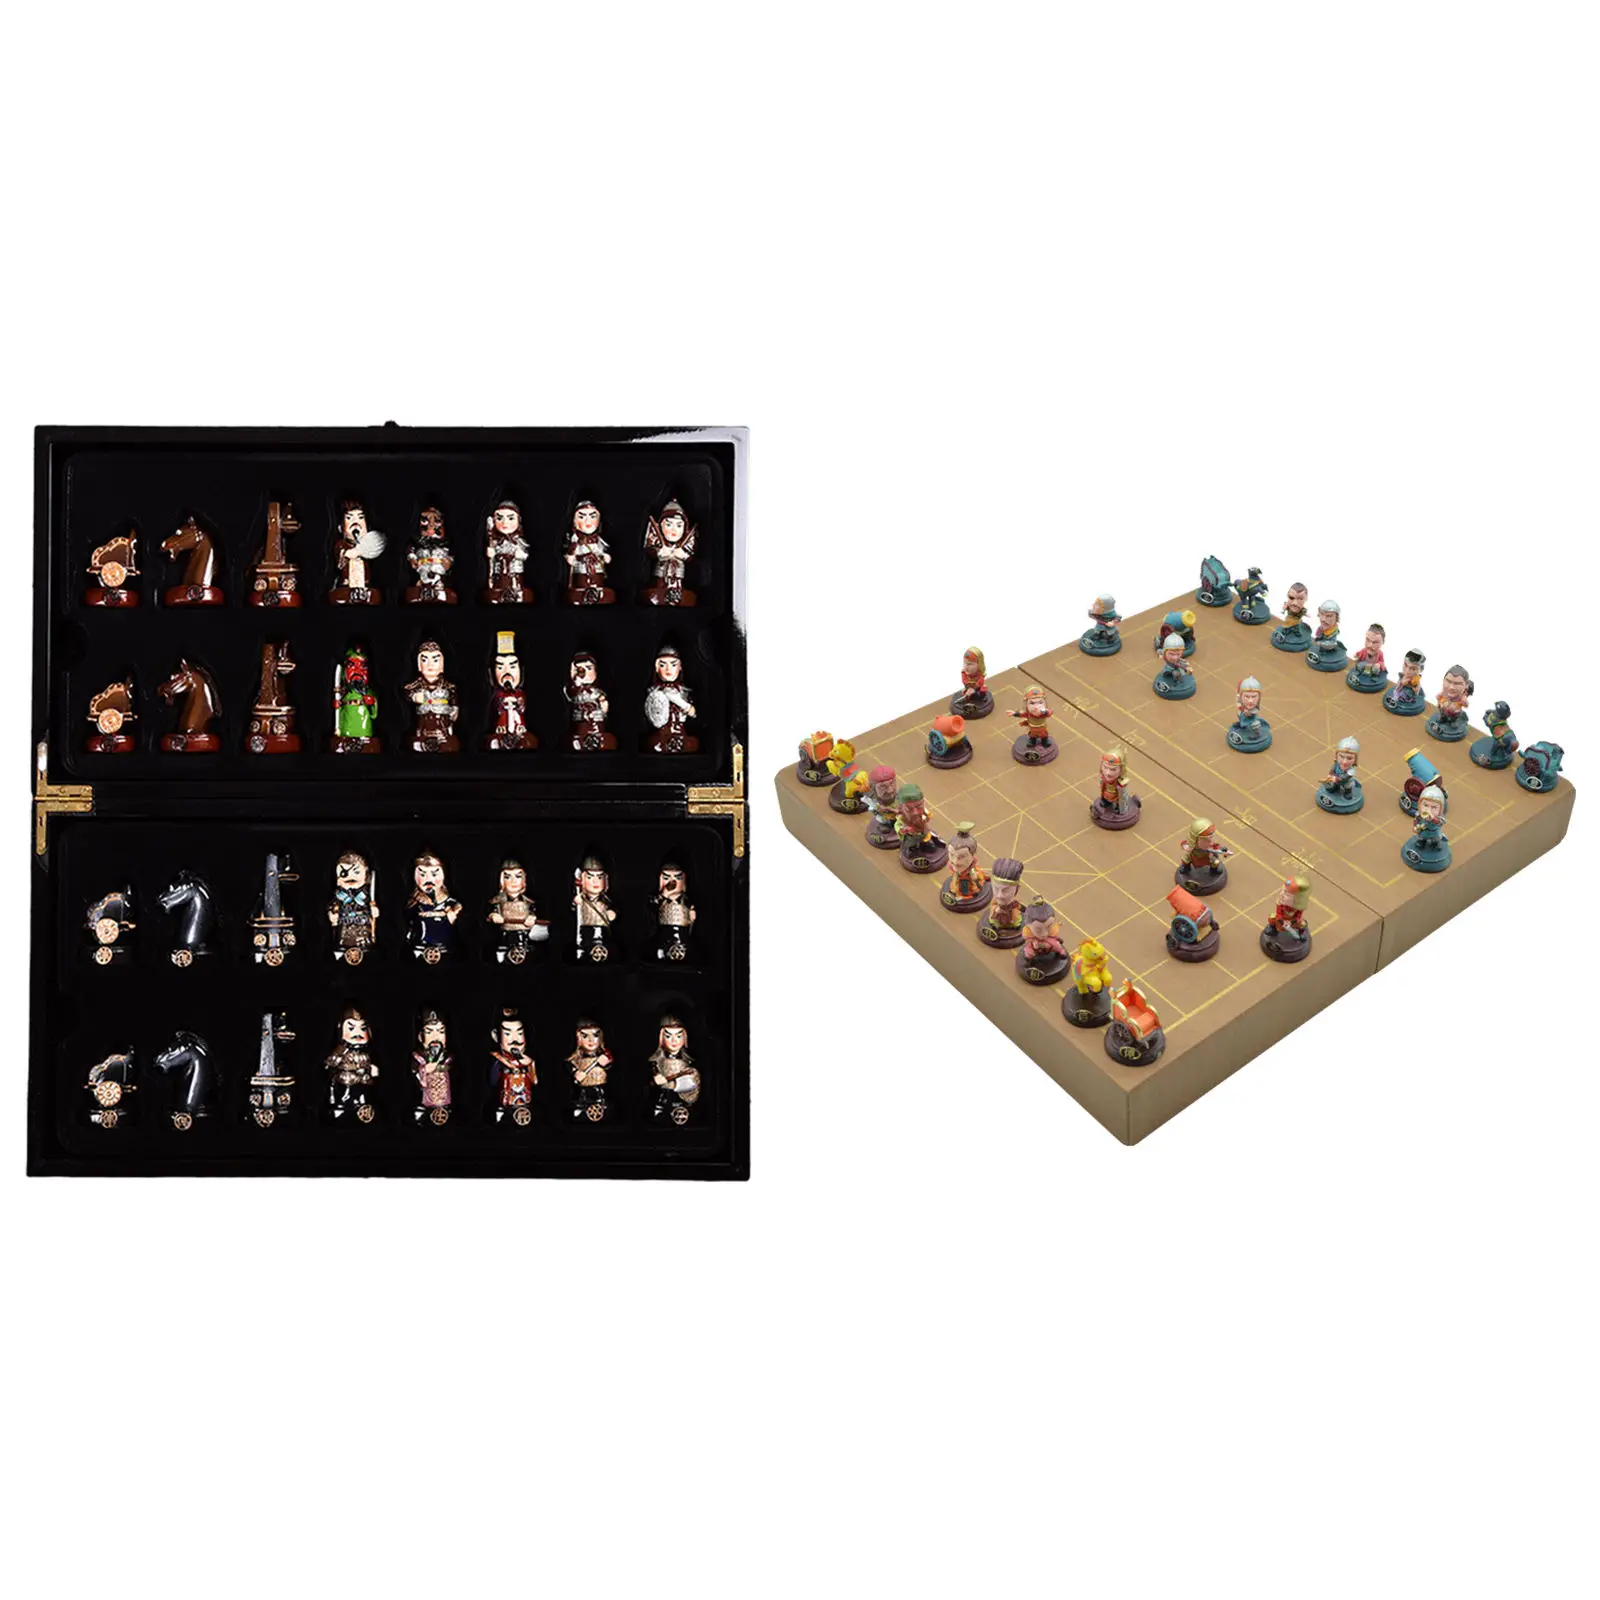 Chinese Chess Set Figures Three dimensional Figure Chess of Three Kingdoms Portable Romance for Home Parent-Child suits